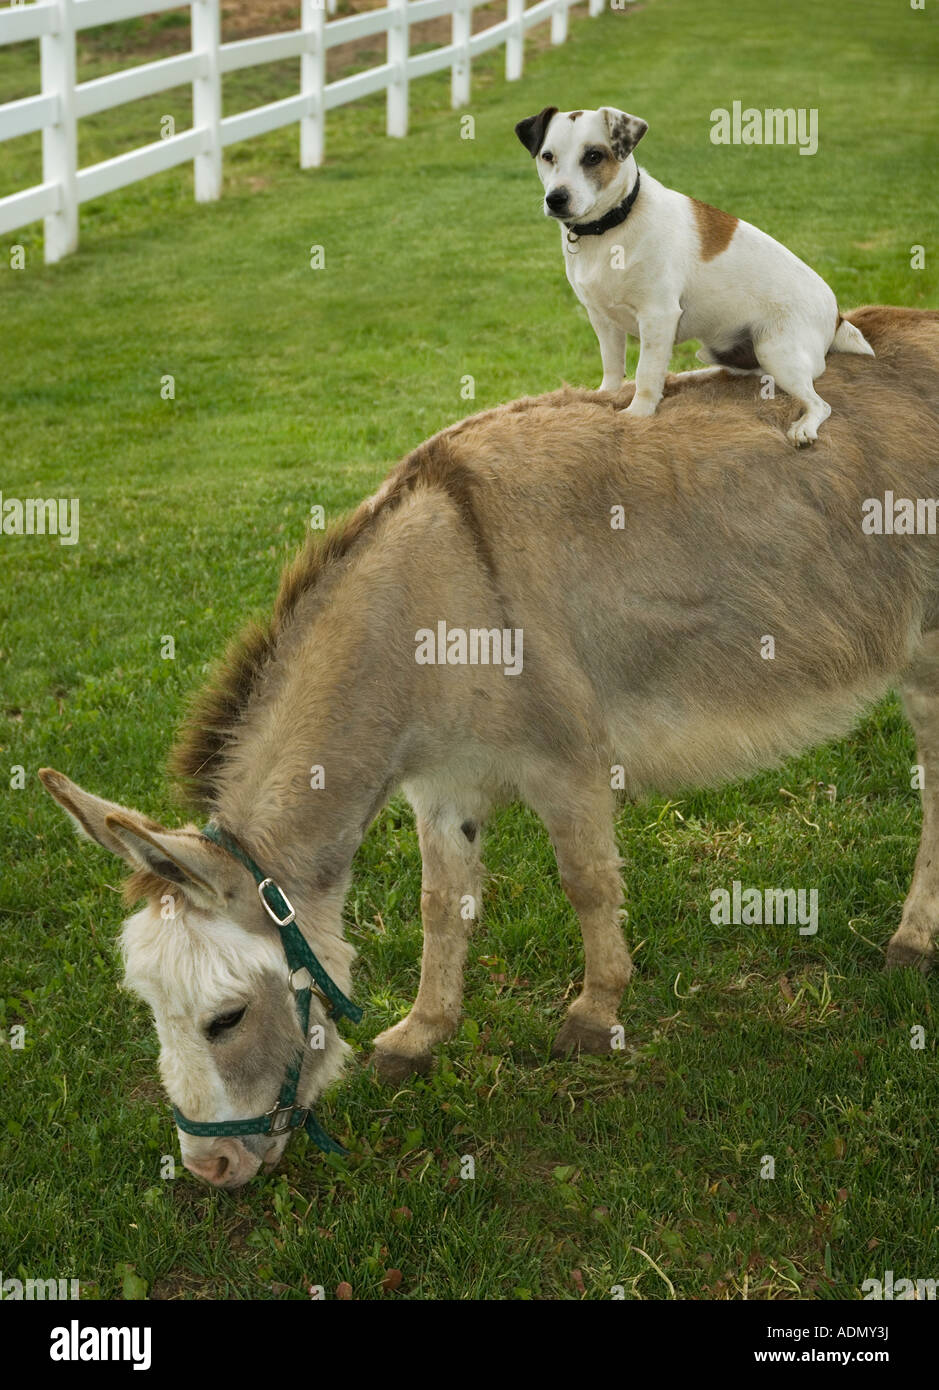 Dog And Donkey Friends High Resolution Stock Photography and Images - Alamy